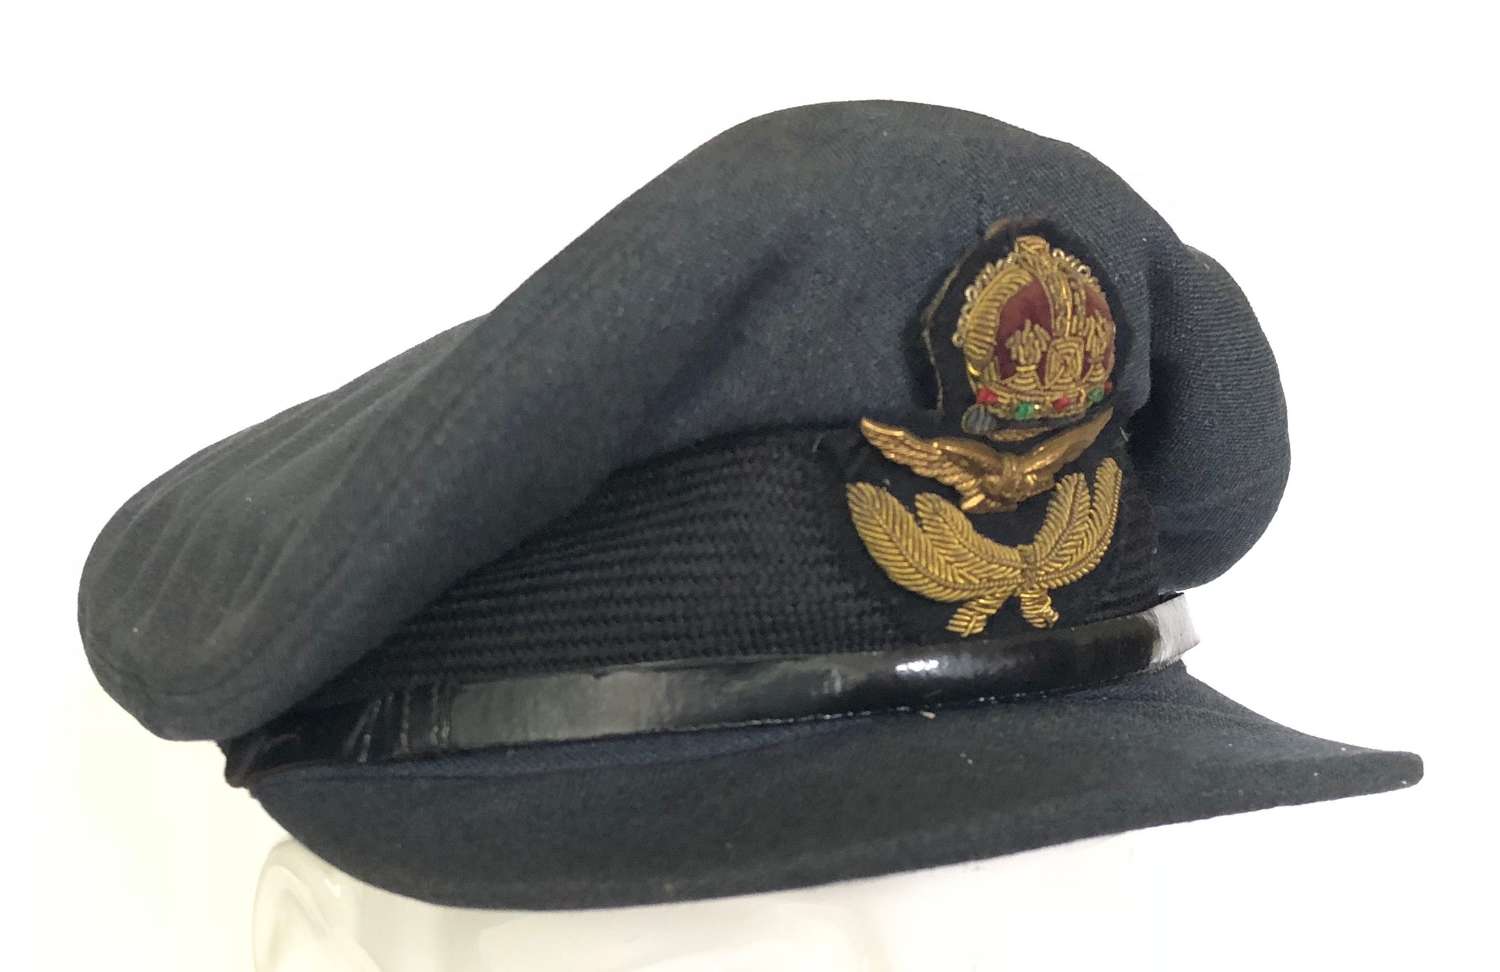 WW2 RAF Large Size Officer’s Peaked Cap.